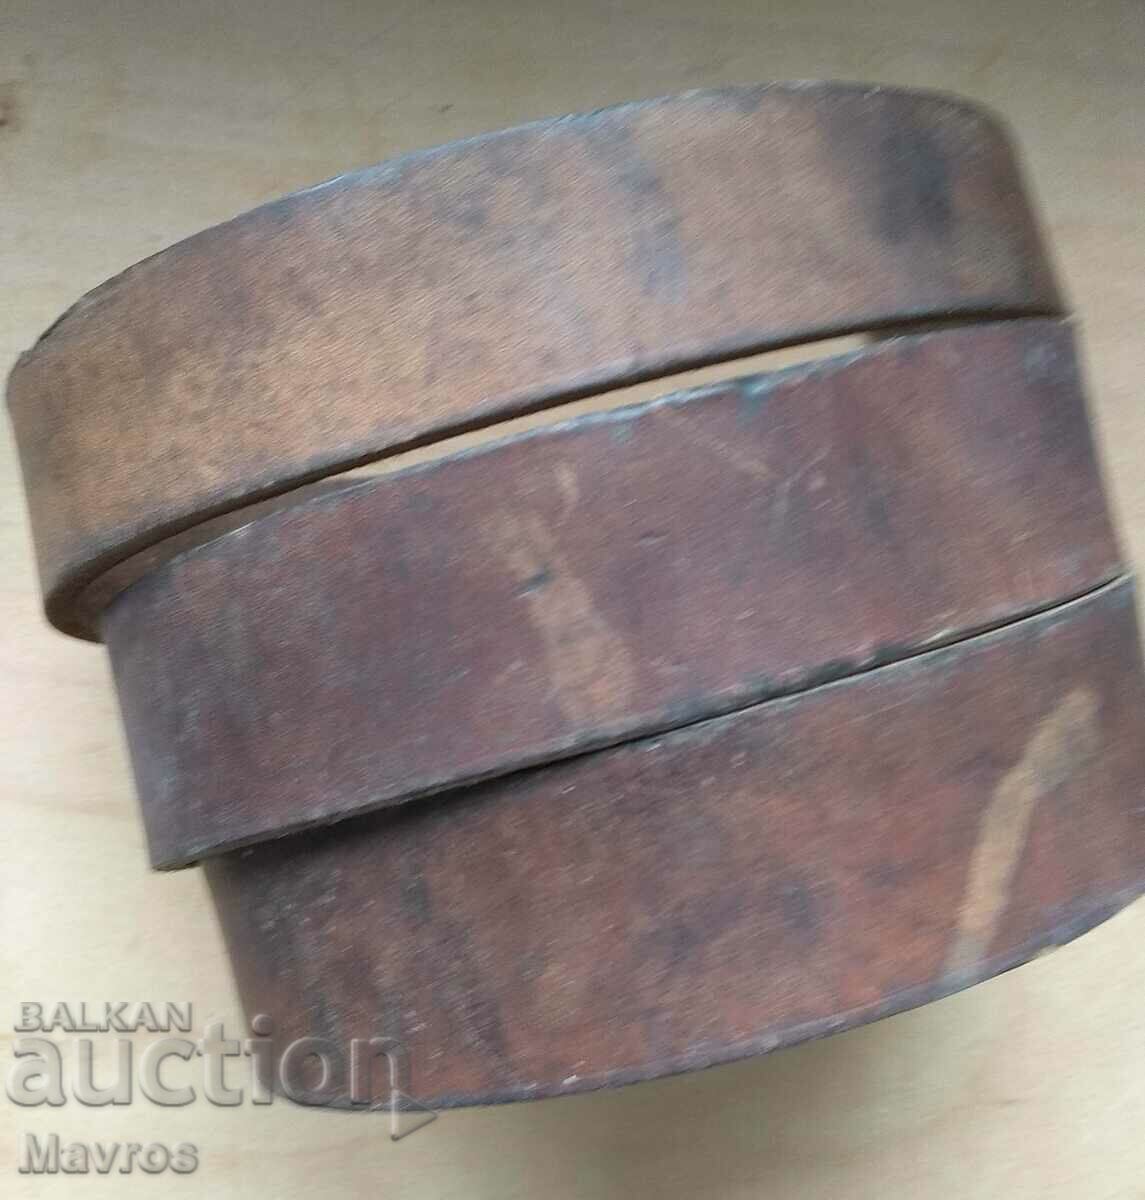 Leather strap, belt for making a knife handle